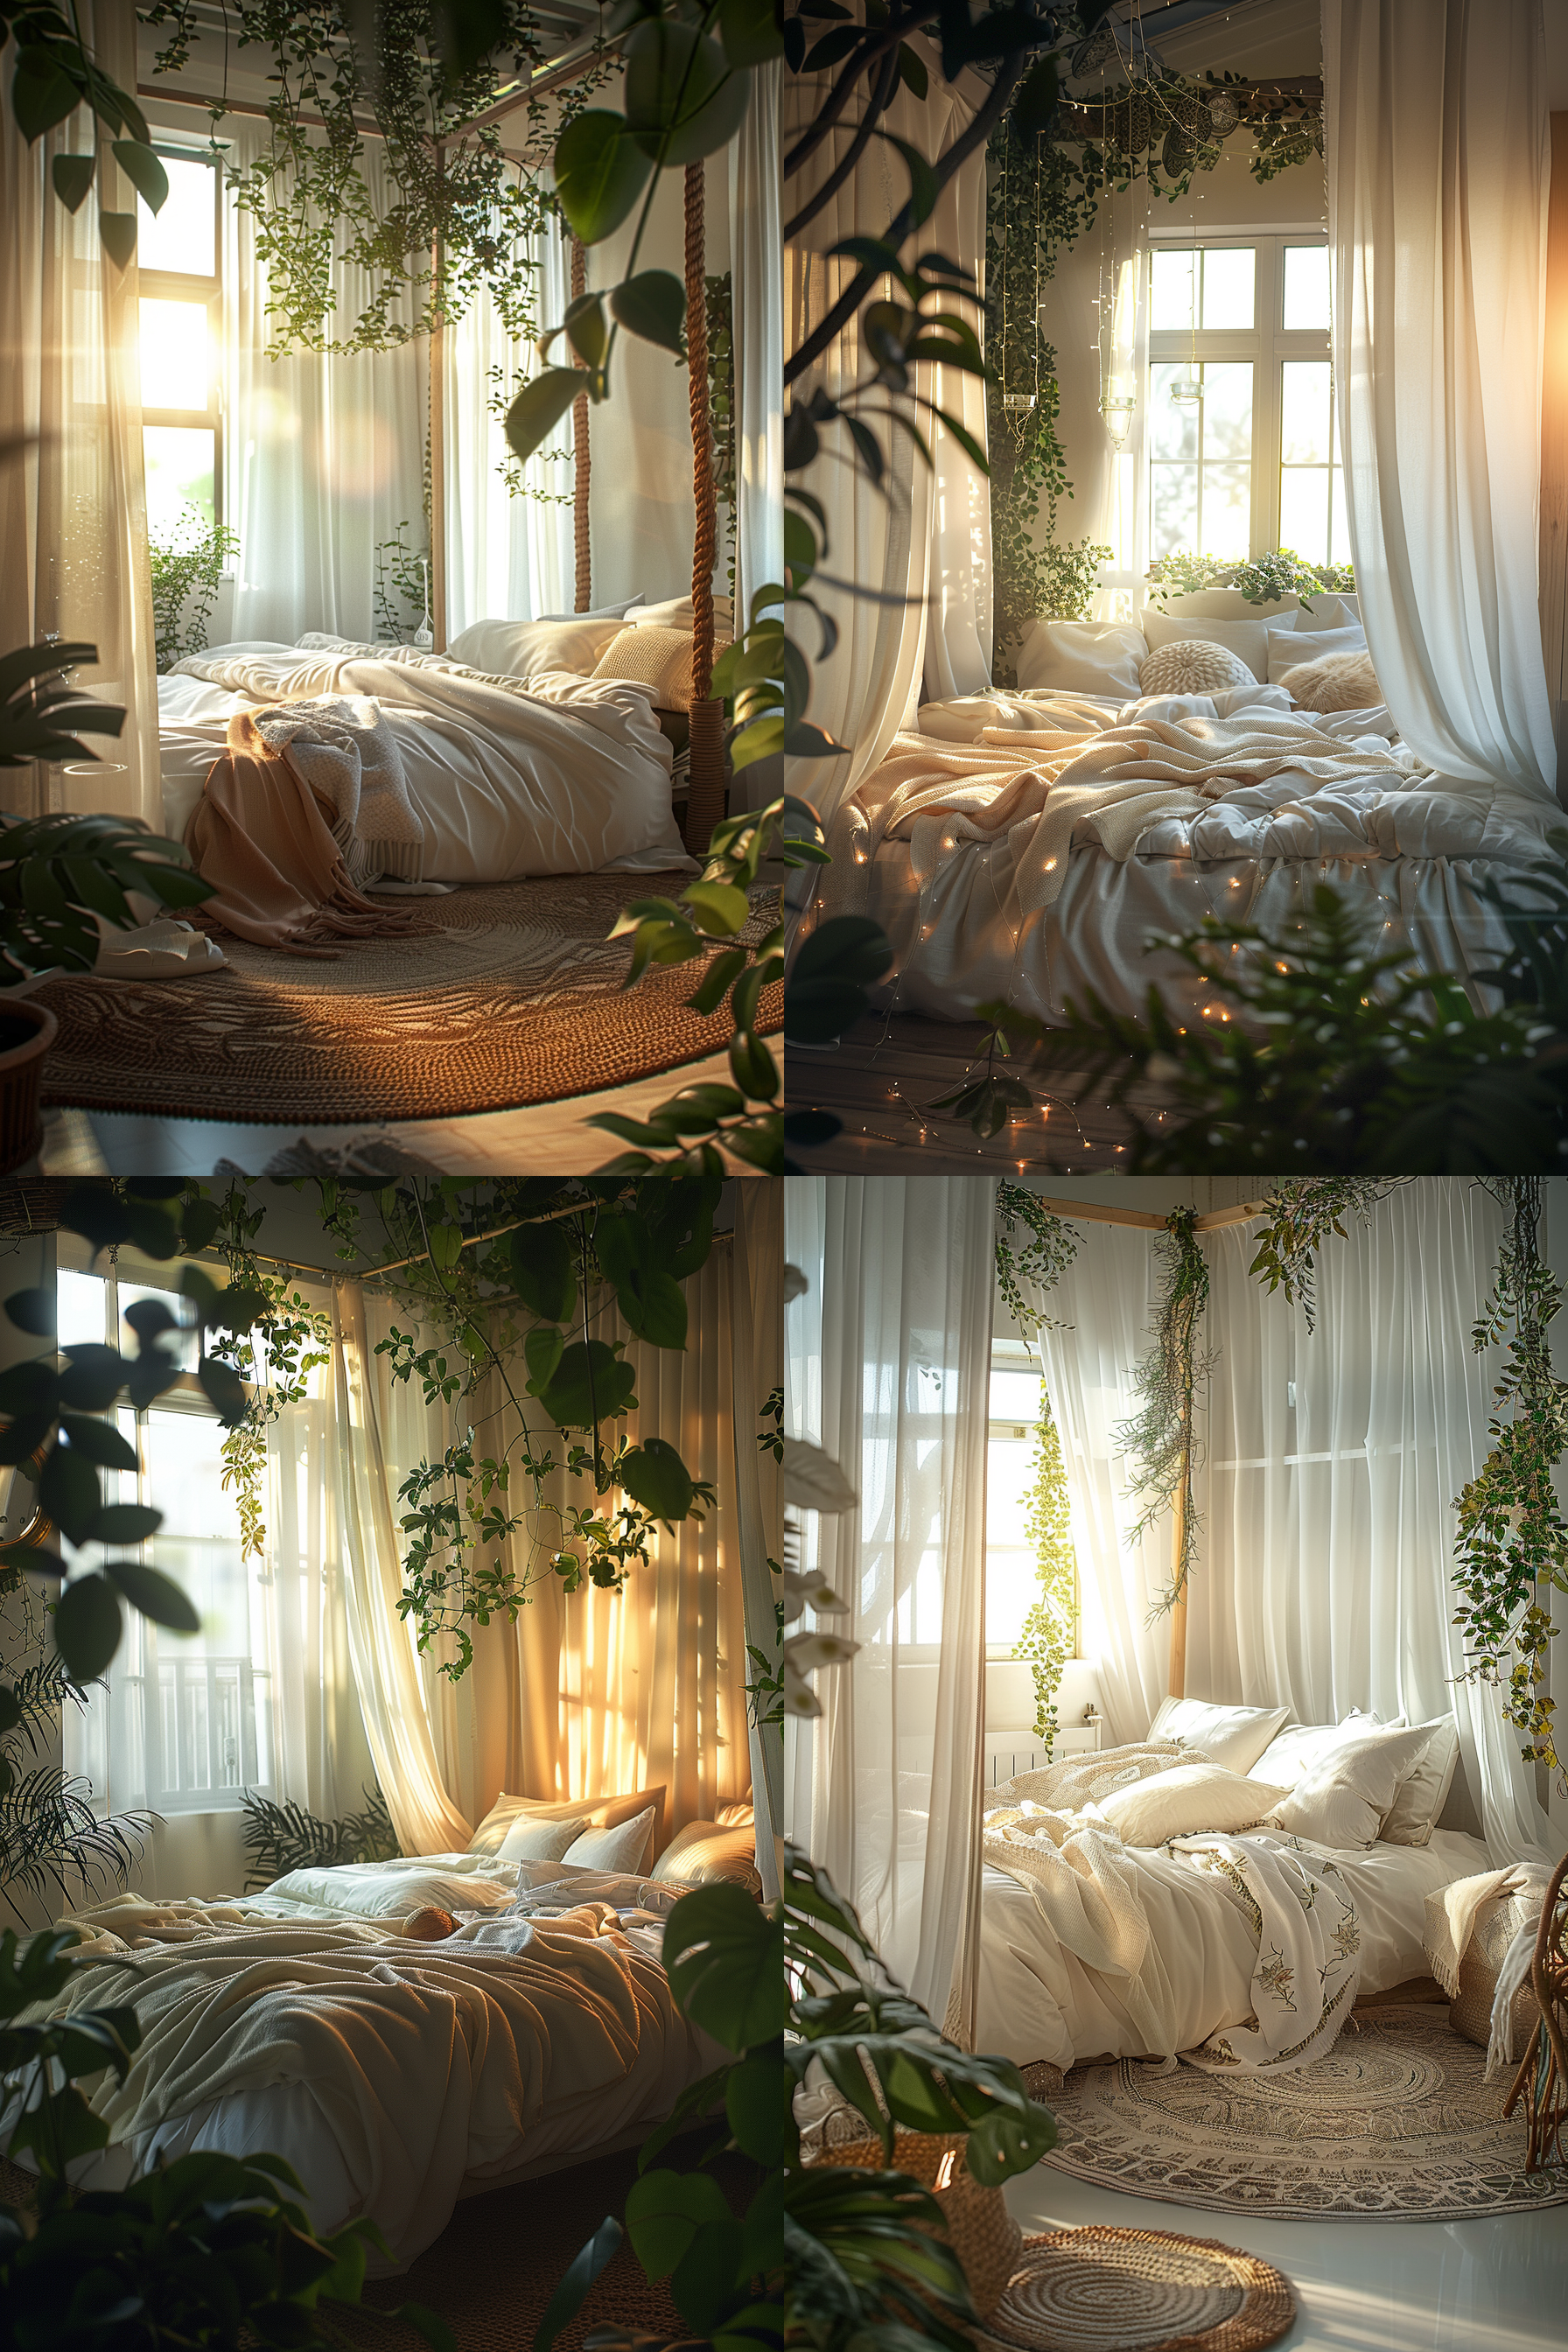 Cozy bedroom with plants, sheer curtains, and warm sunlight, in four different atmospheric settings.